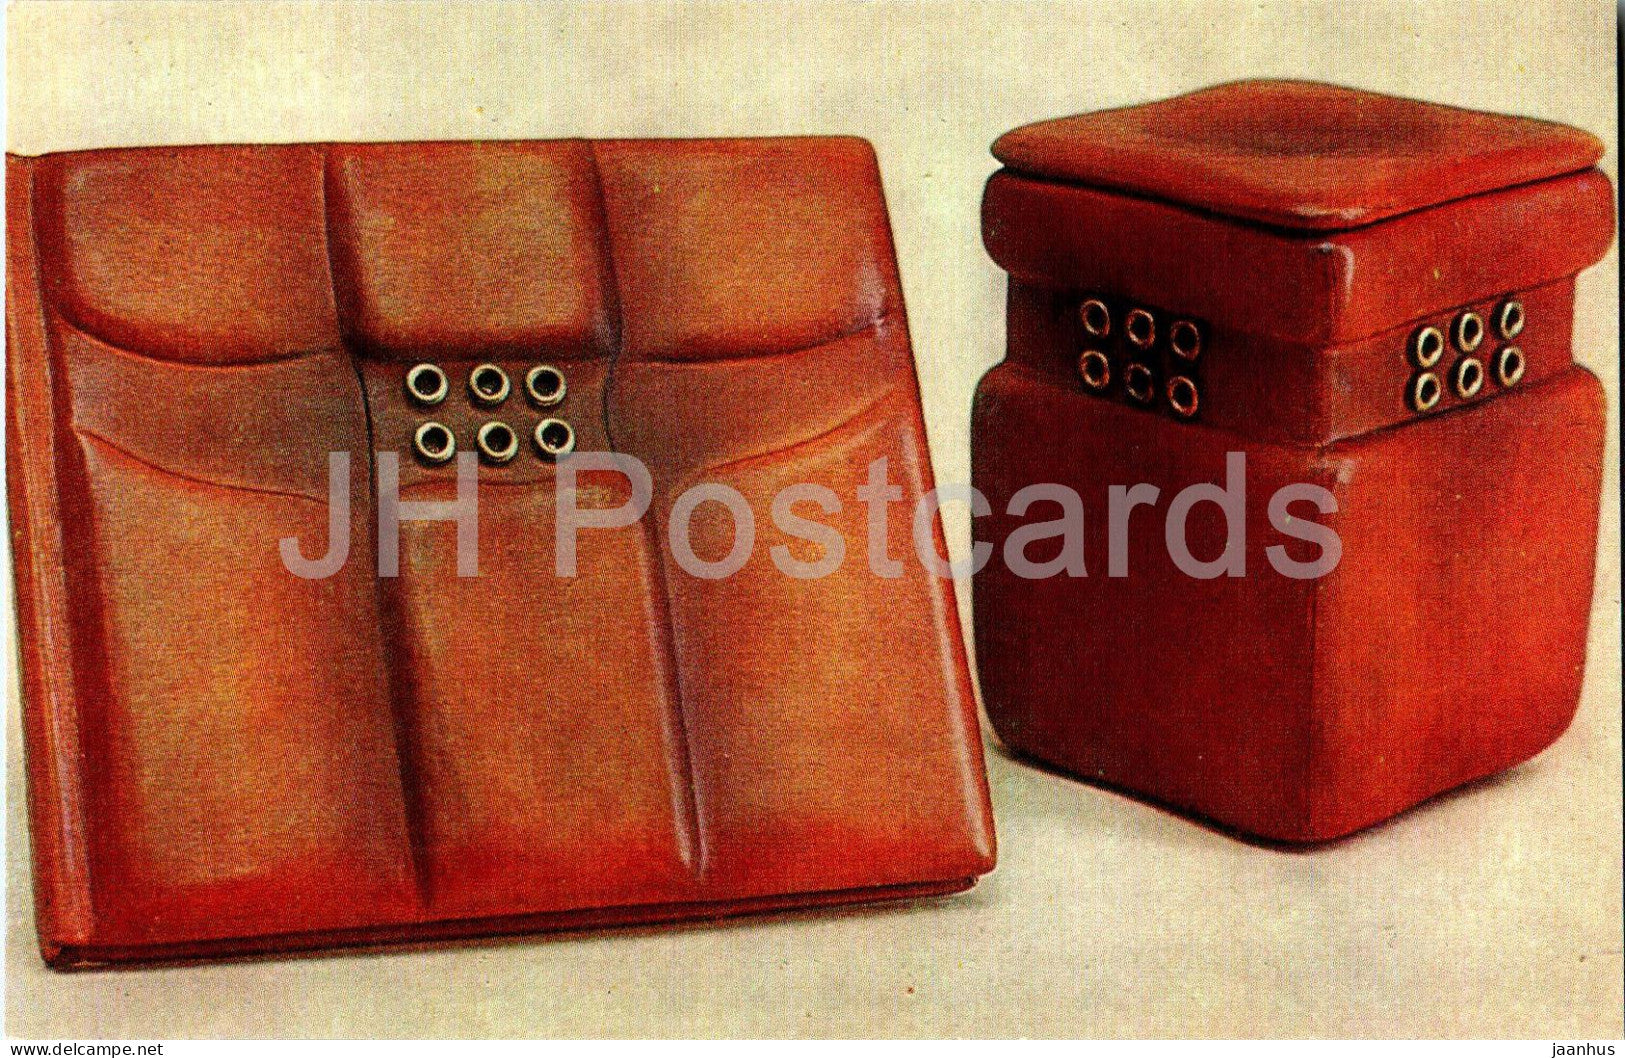 visiting book and a box by V. Baltoka - leather - metal - applied art - Latvian art - 1963 - Latvia USSR - unused - JH Postcards